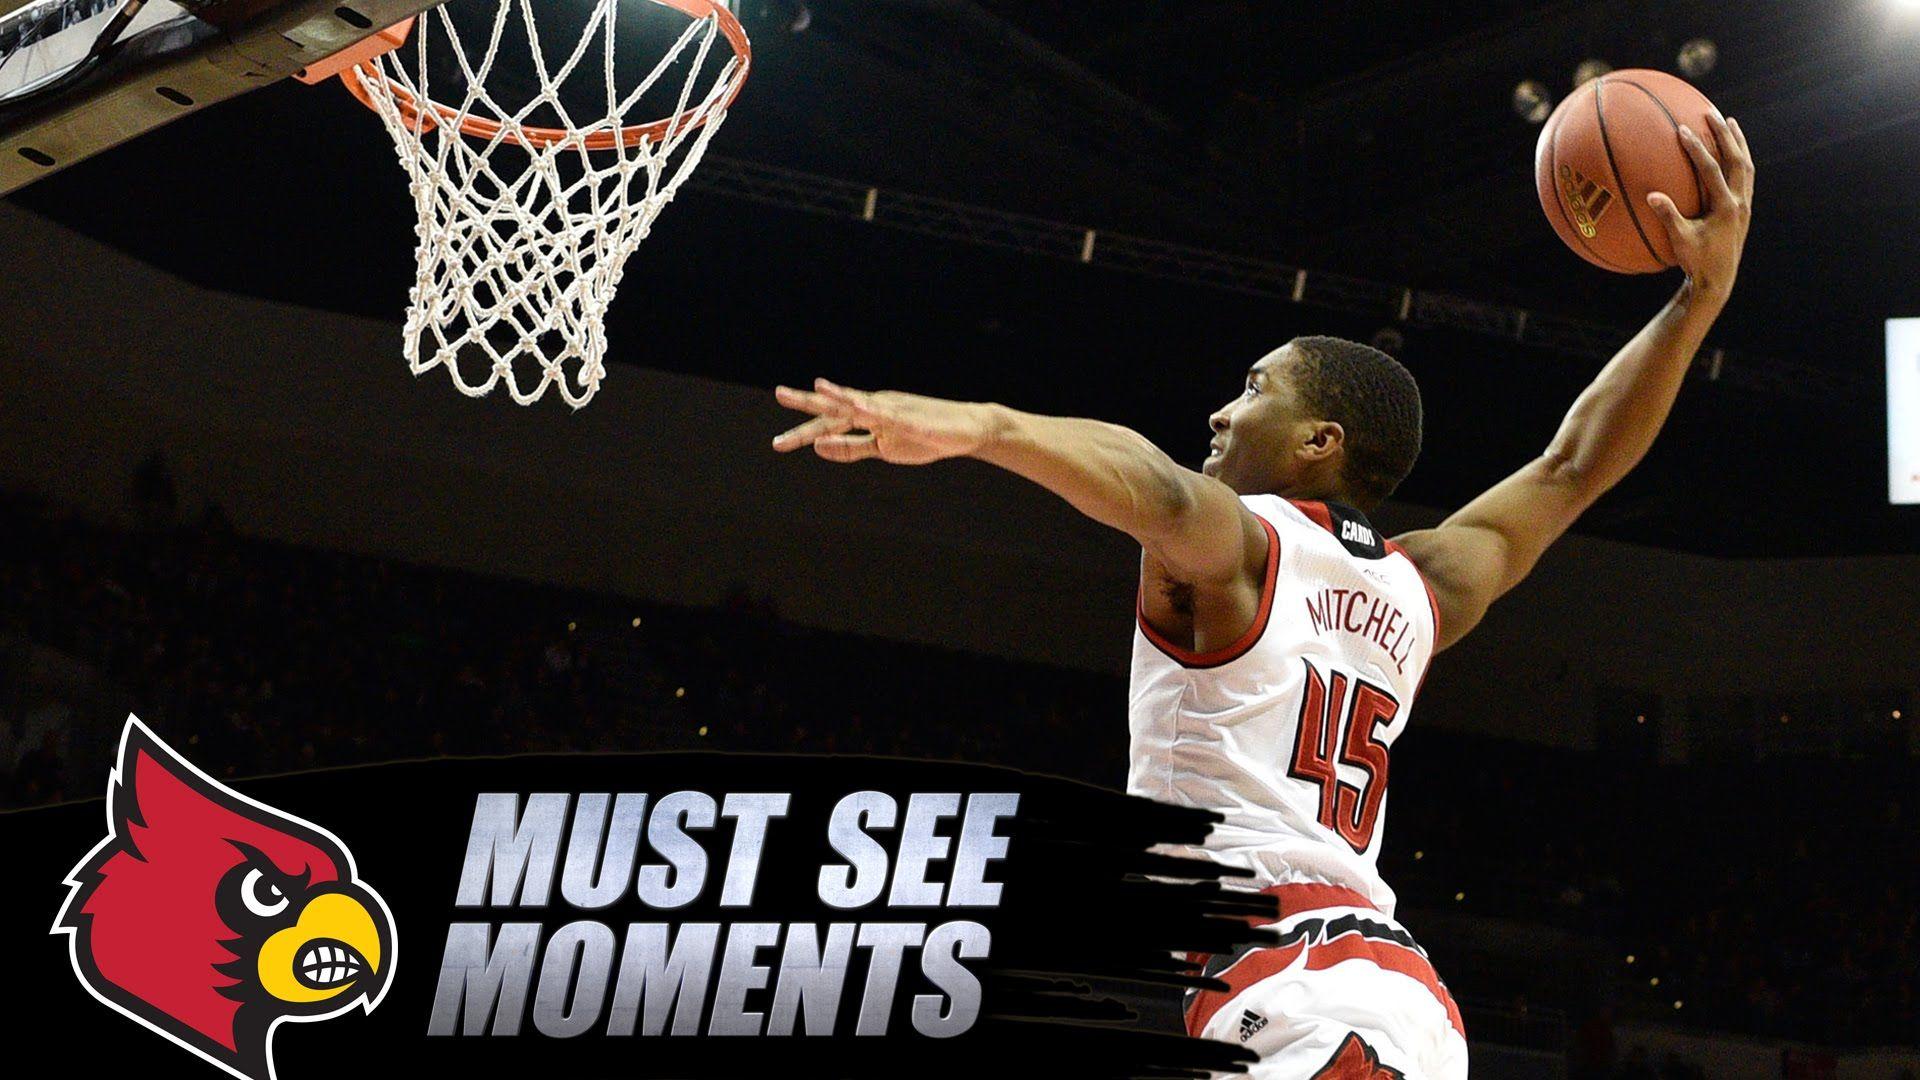 Louisville's Donovan Mitchell Winds Up For Huge Alley Oop Dunk